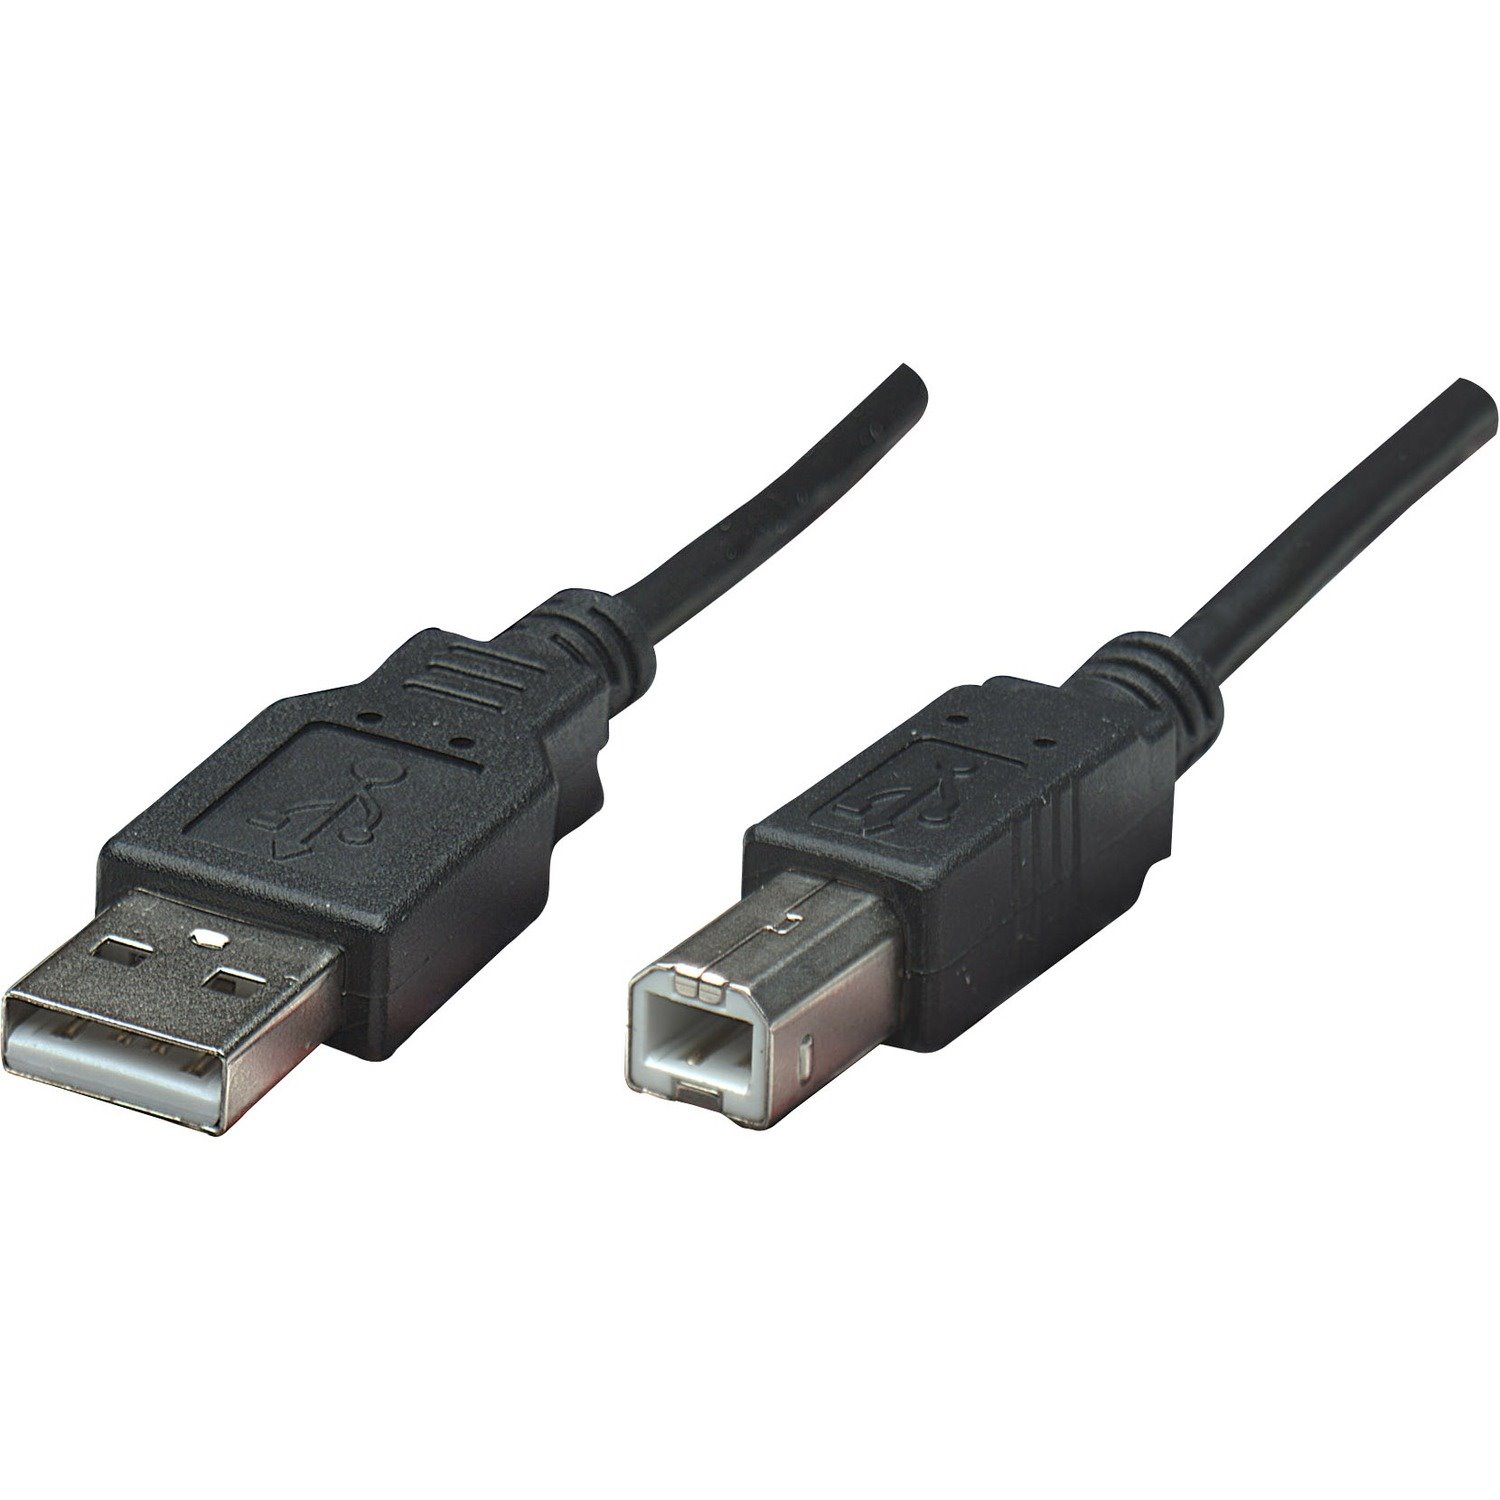 Manhattan 10 FT Usb Device Cable